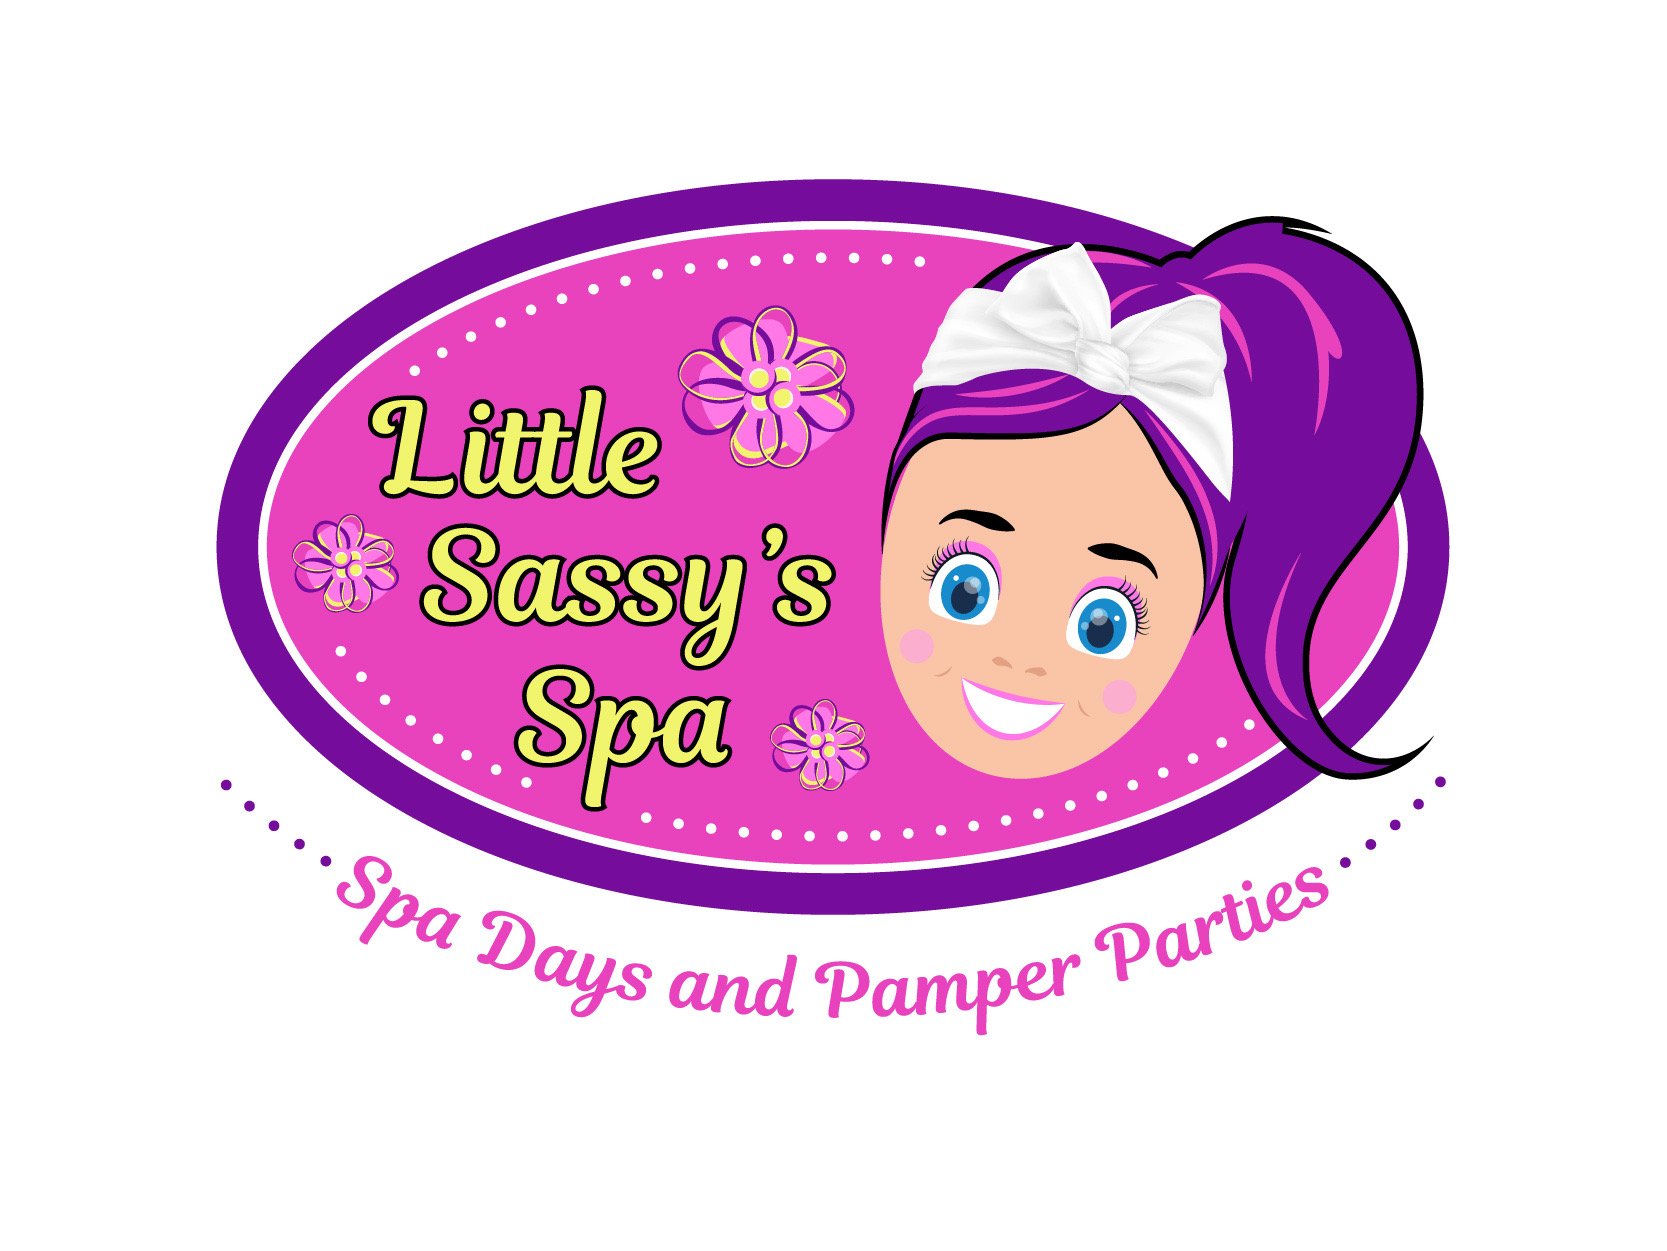 Pamper party